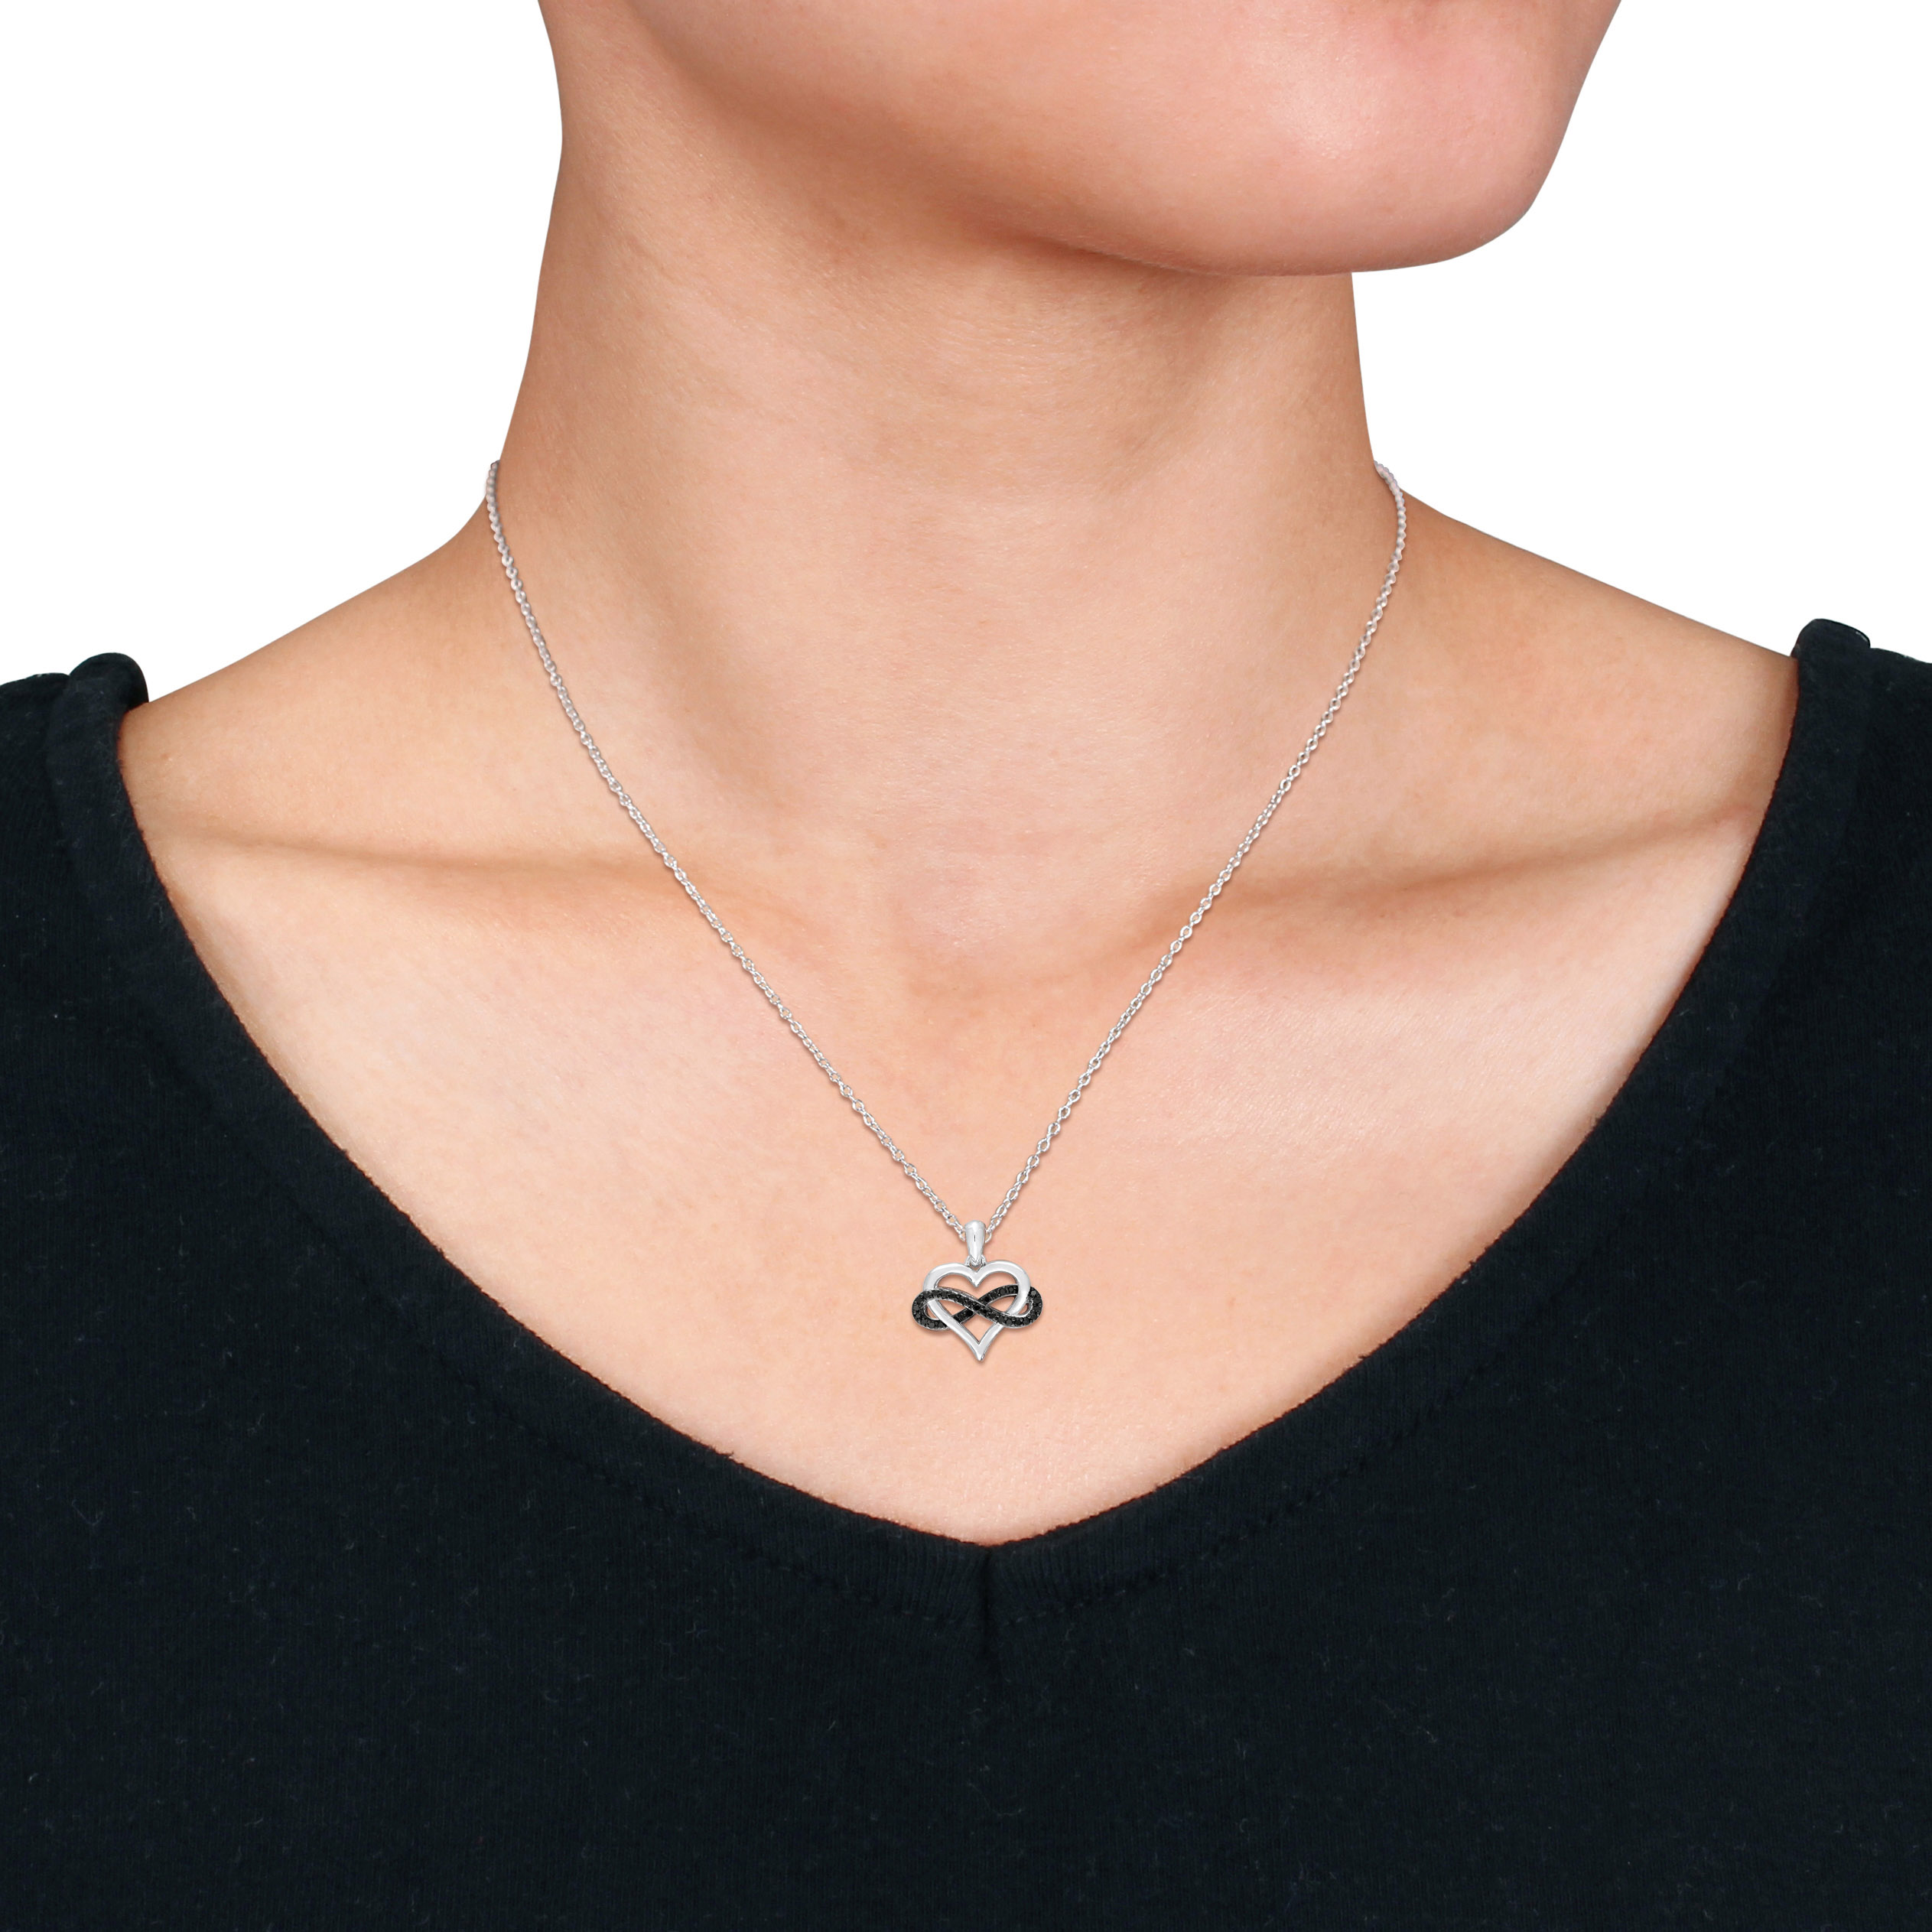 1/6 CT TW Black Diamond Heart and Infinity Pendant in Black Rhodium Plated Sterling Silver - 18 in.